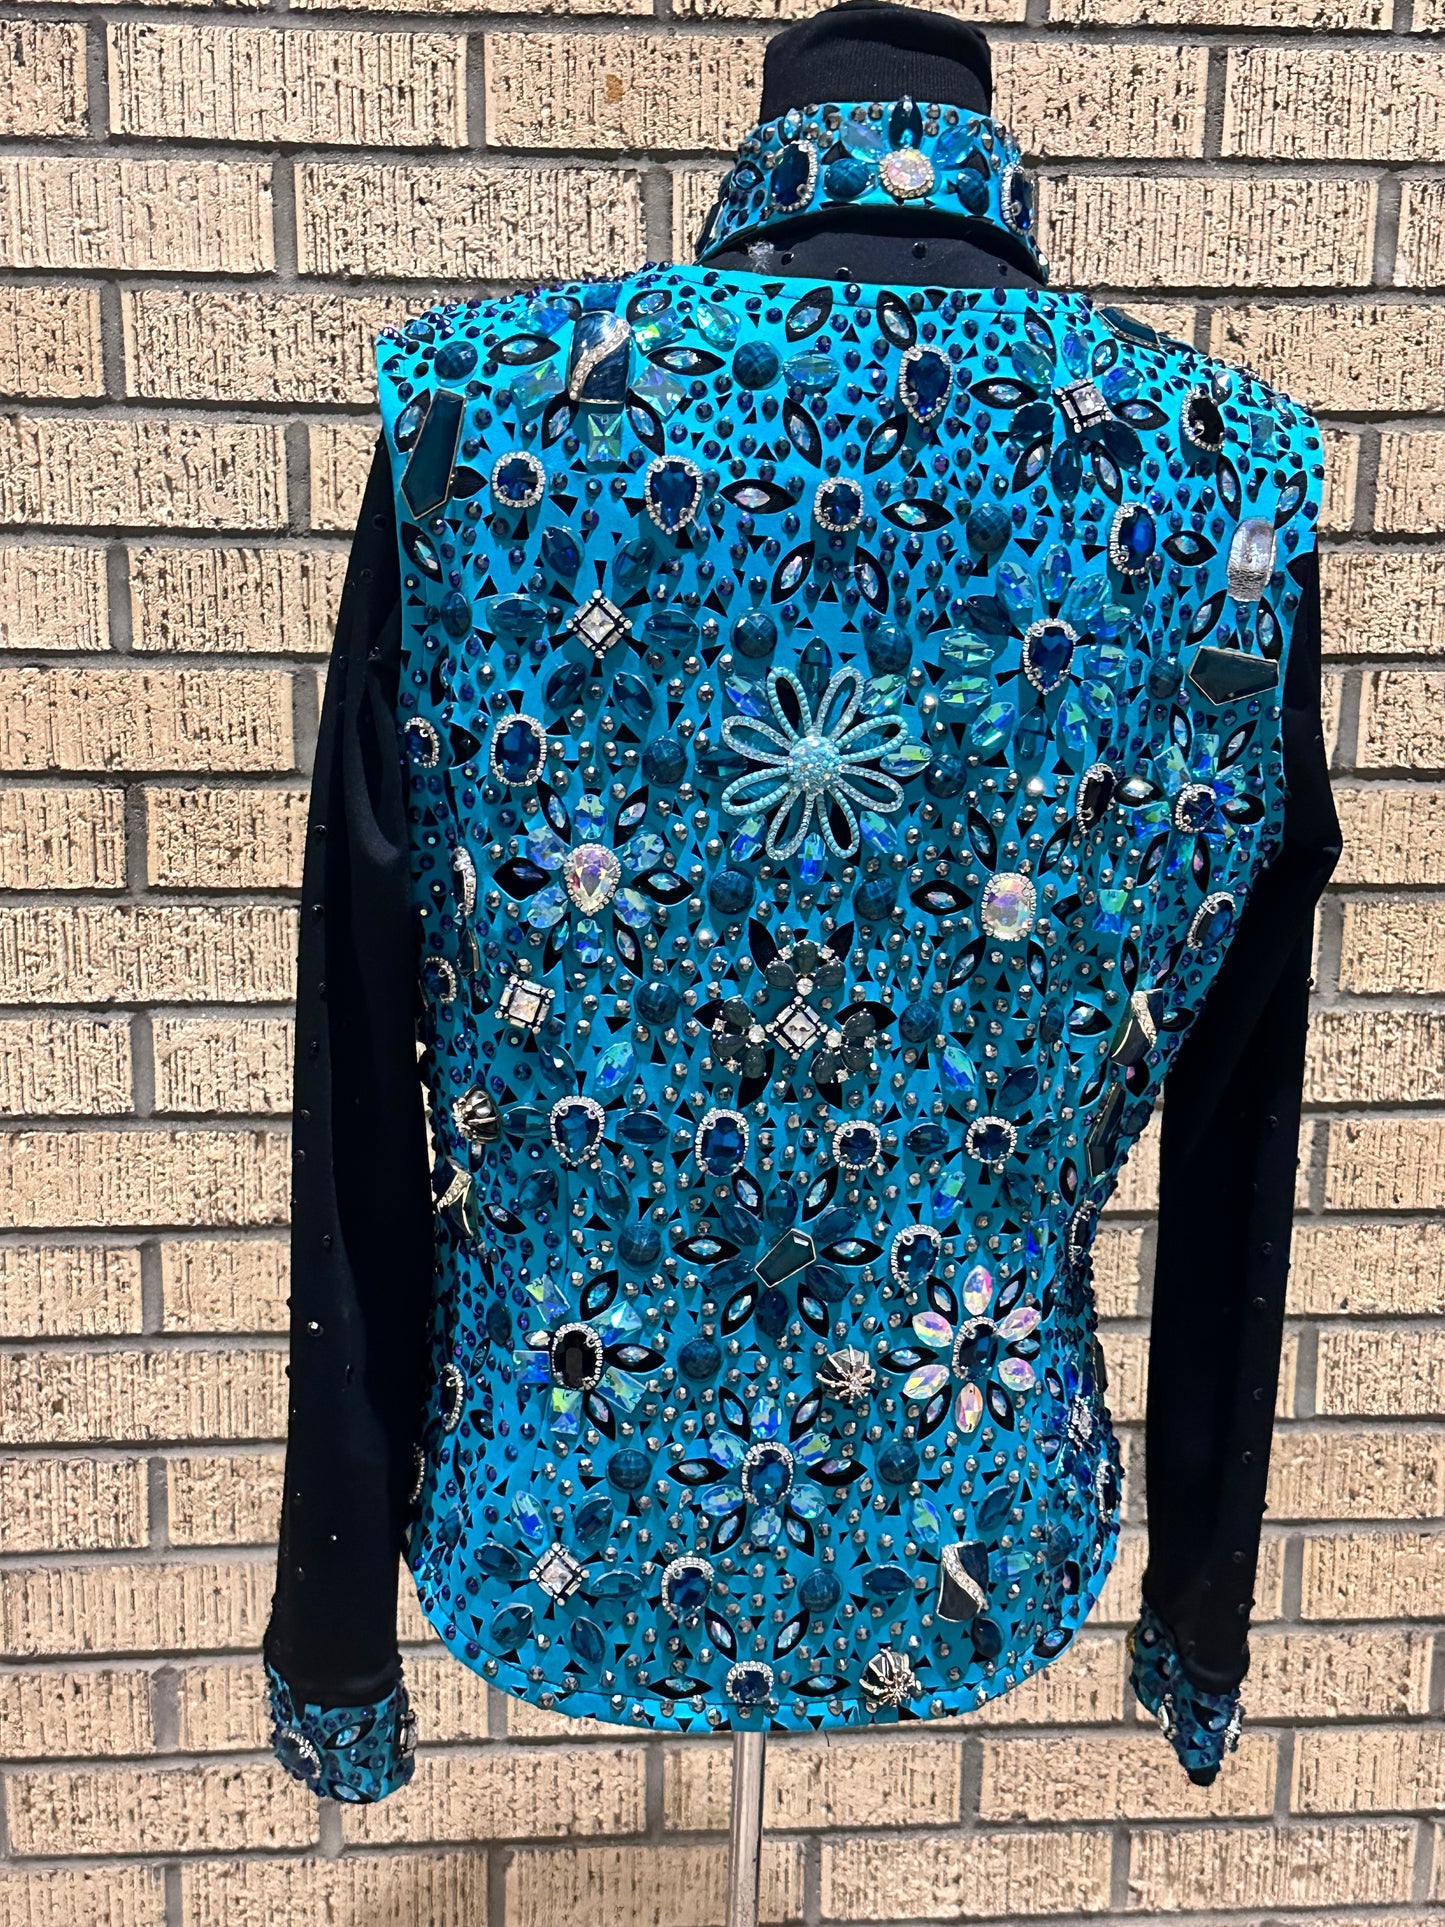 Size LARGE black and turquoise vest set with turquoise, black and silver designs